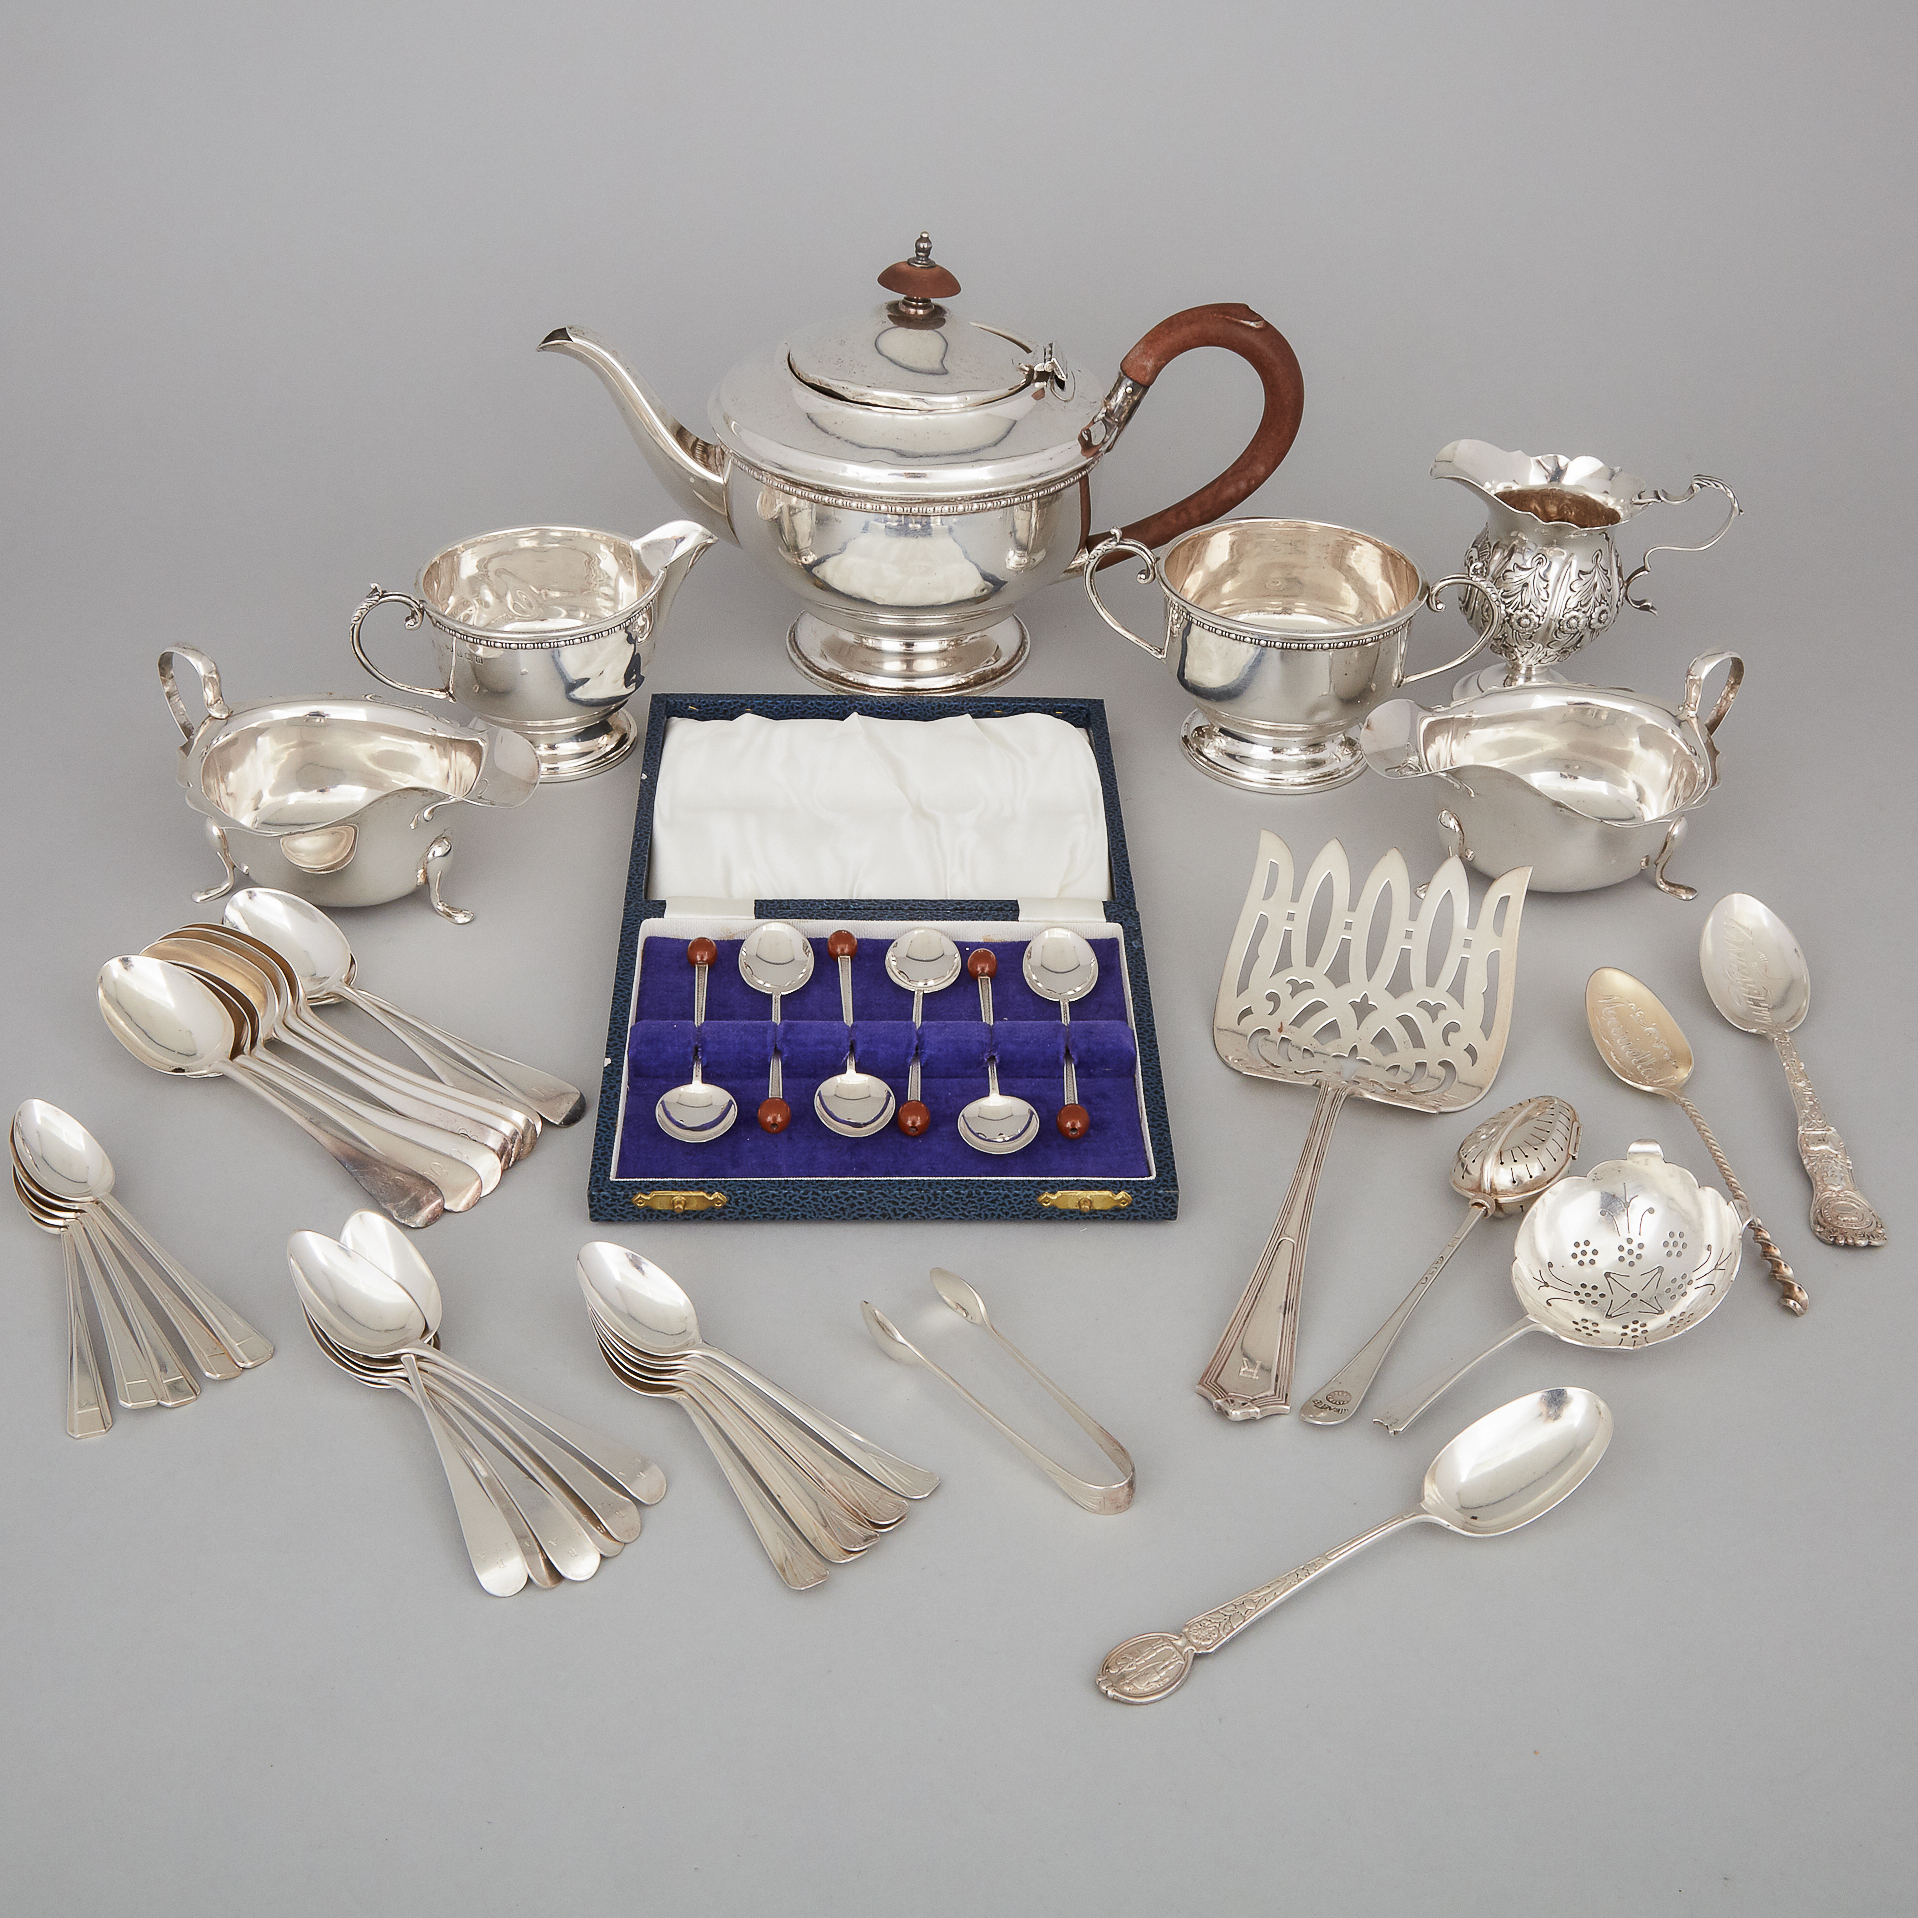 Group of Mainly Georgian, Victorian and Later English Silver, 19th-20th century